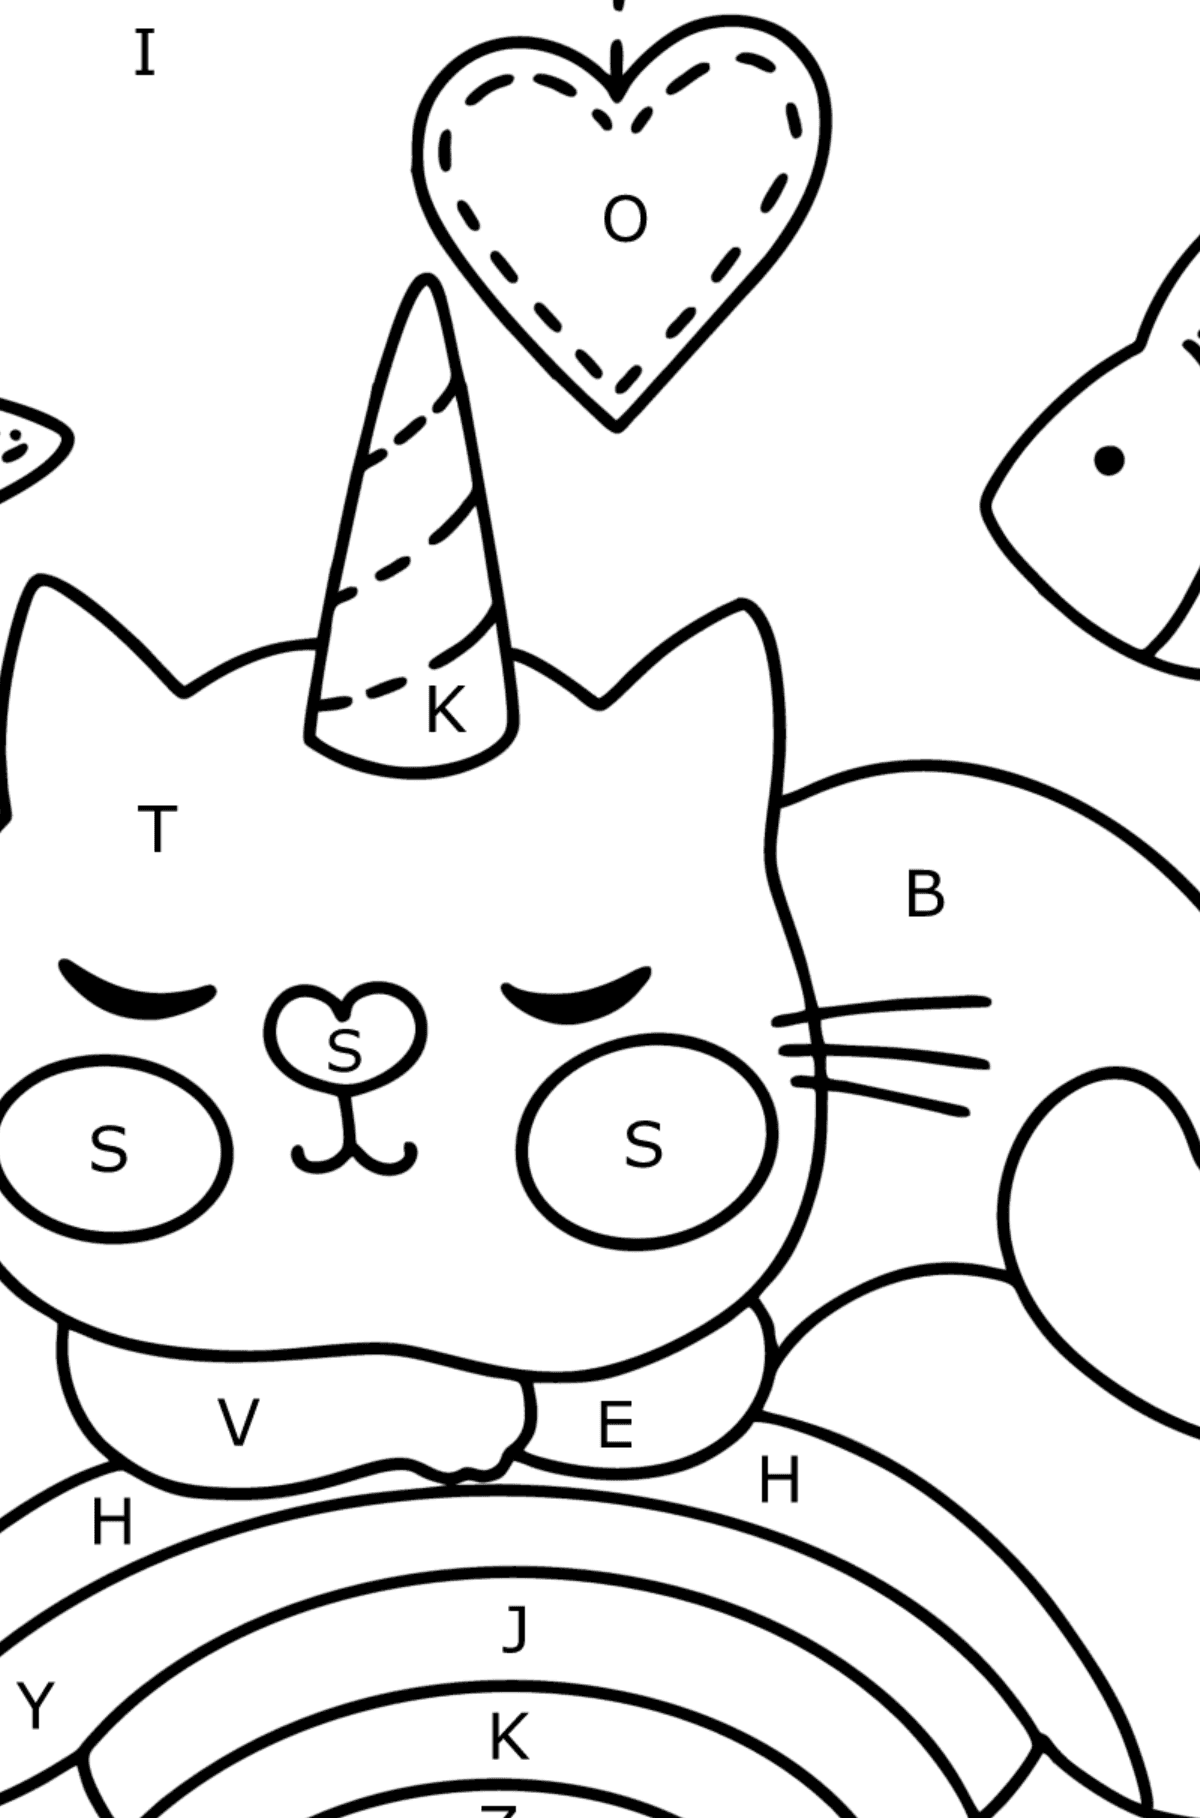 Cute cat unicorn coloring page - Coloring by Letters for Kids